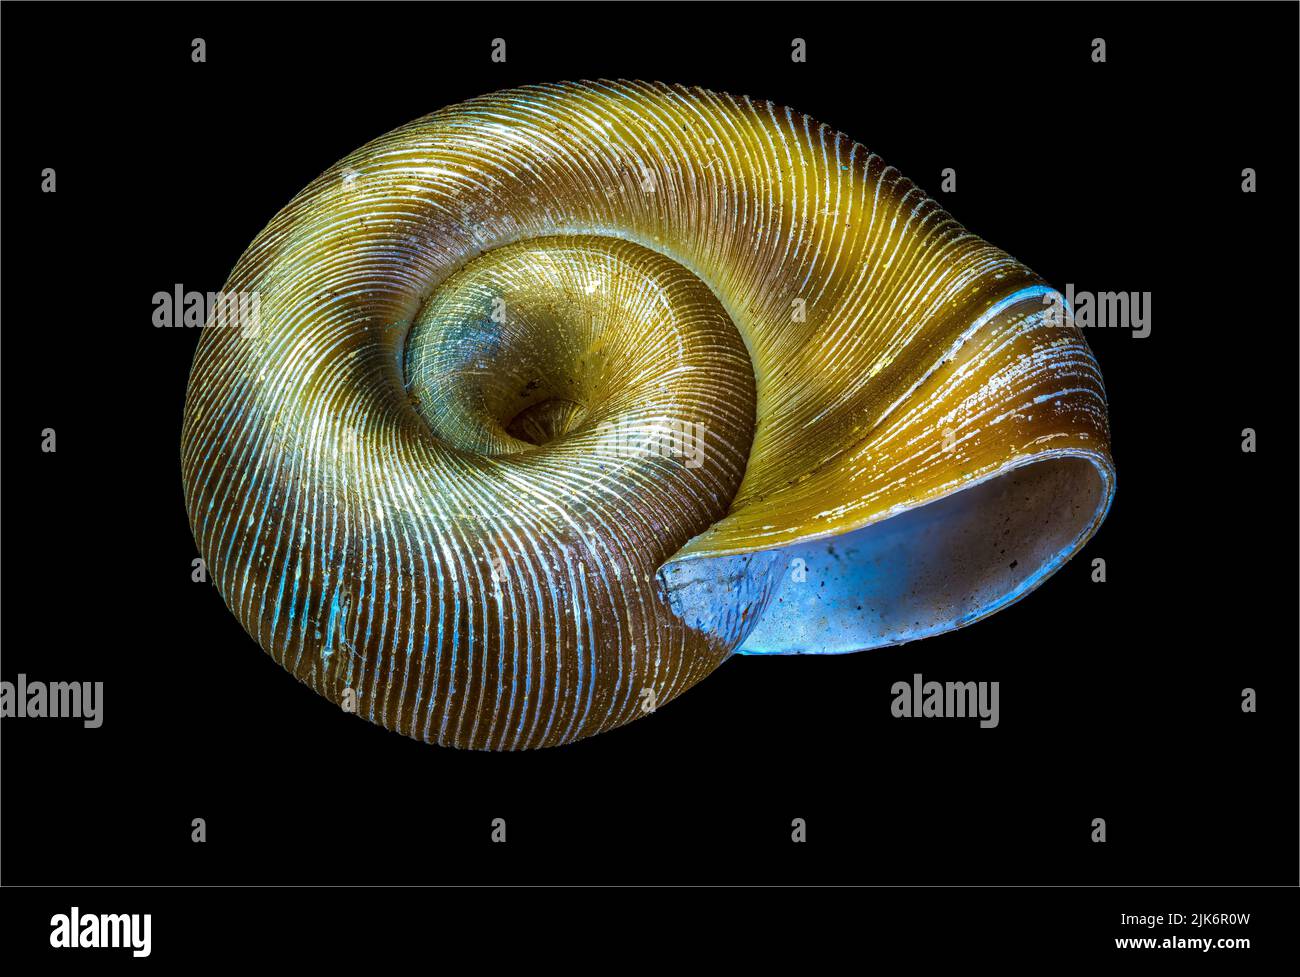 Macro view of the shell of a freshwater ramshorn snail (family Planorbidae). Stock Photo